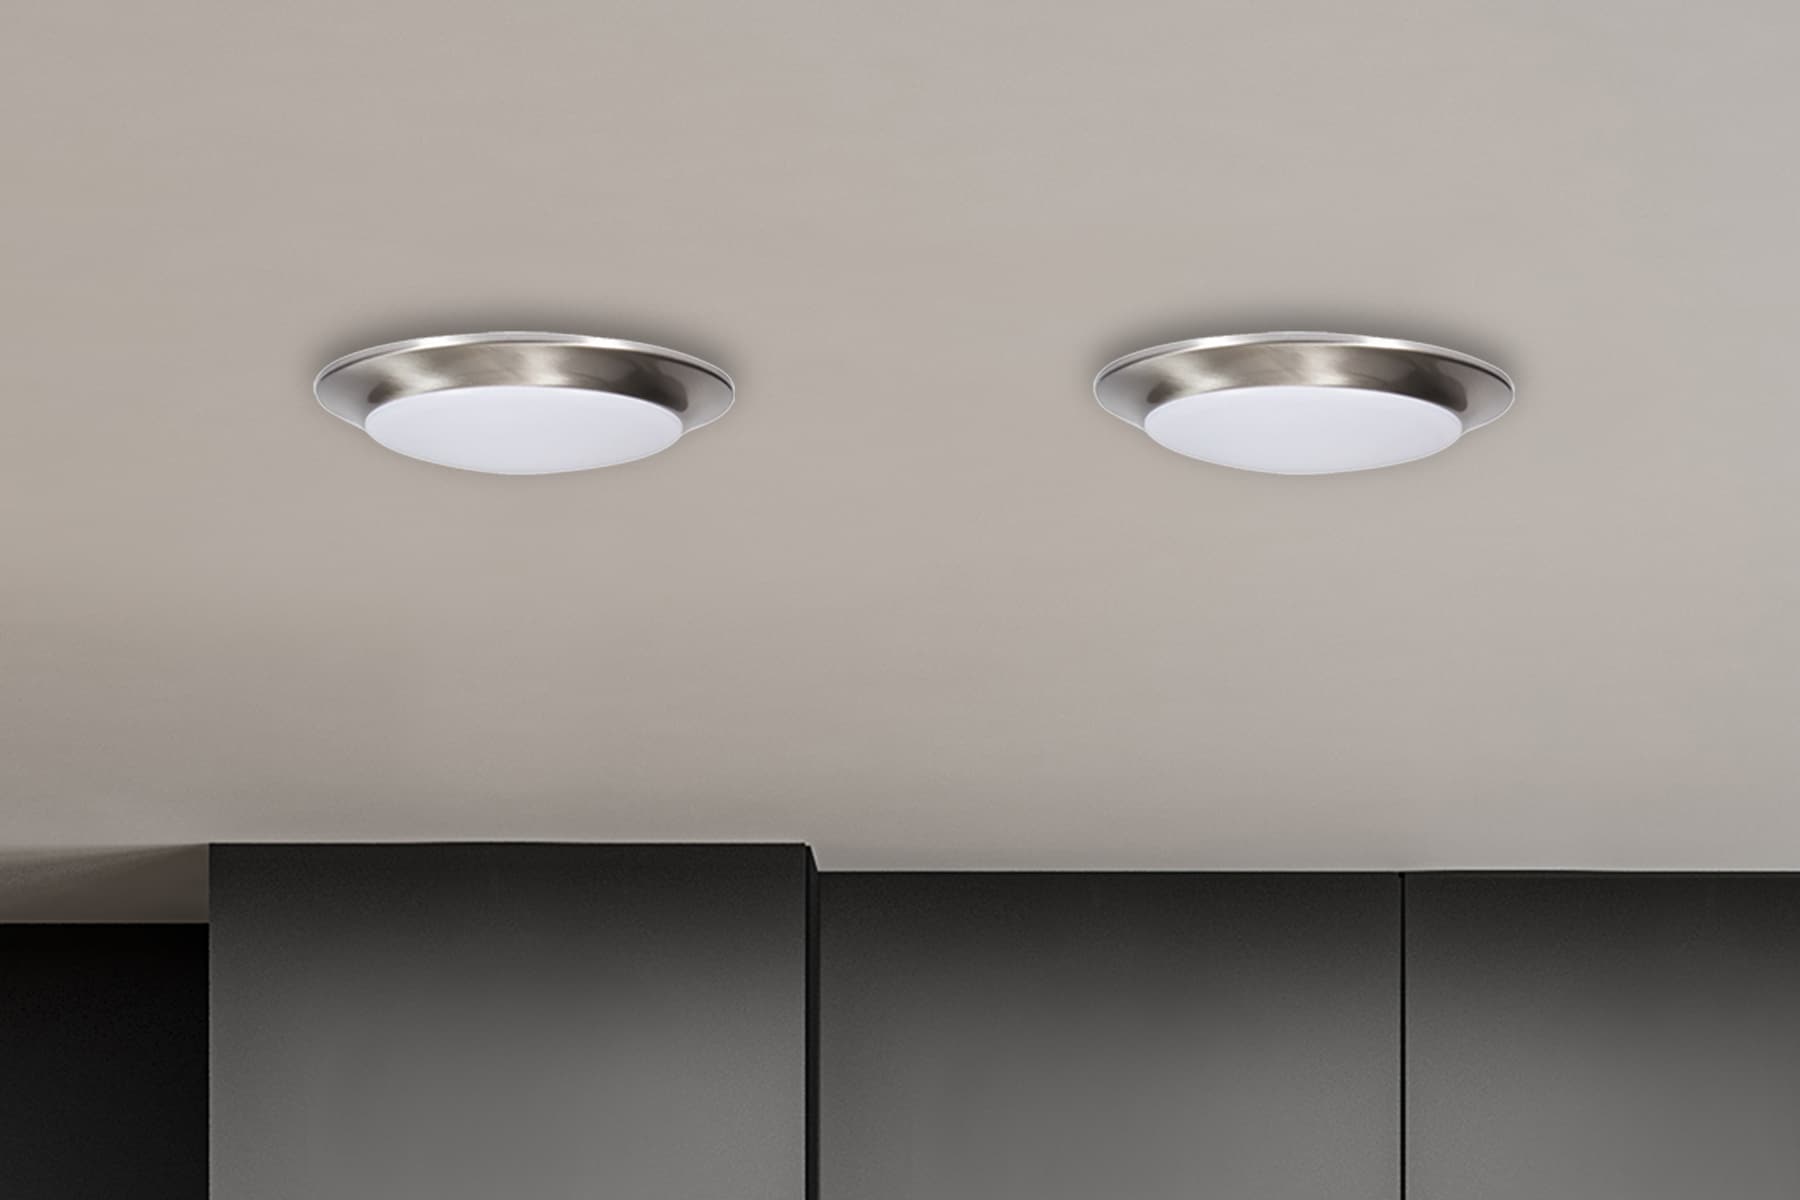 Project Source 1 Light 7 4 In Brushed Nickel Led Flush Mount 2 Pack The Lighting Department At Lowes Com